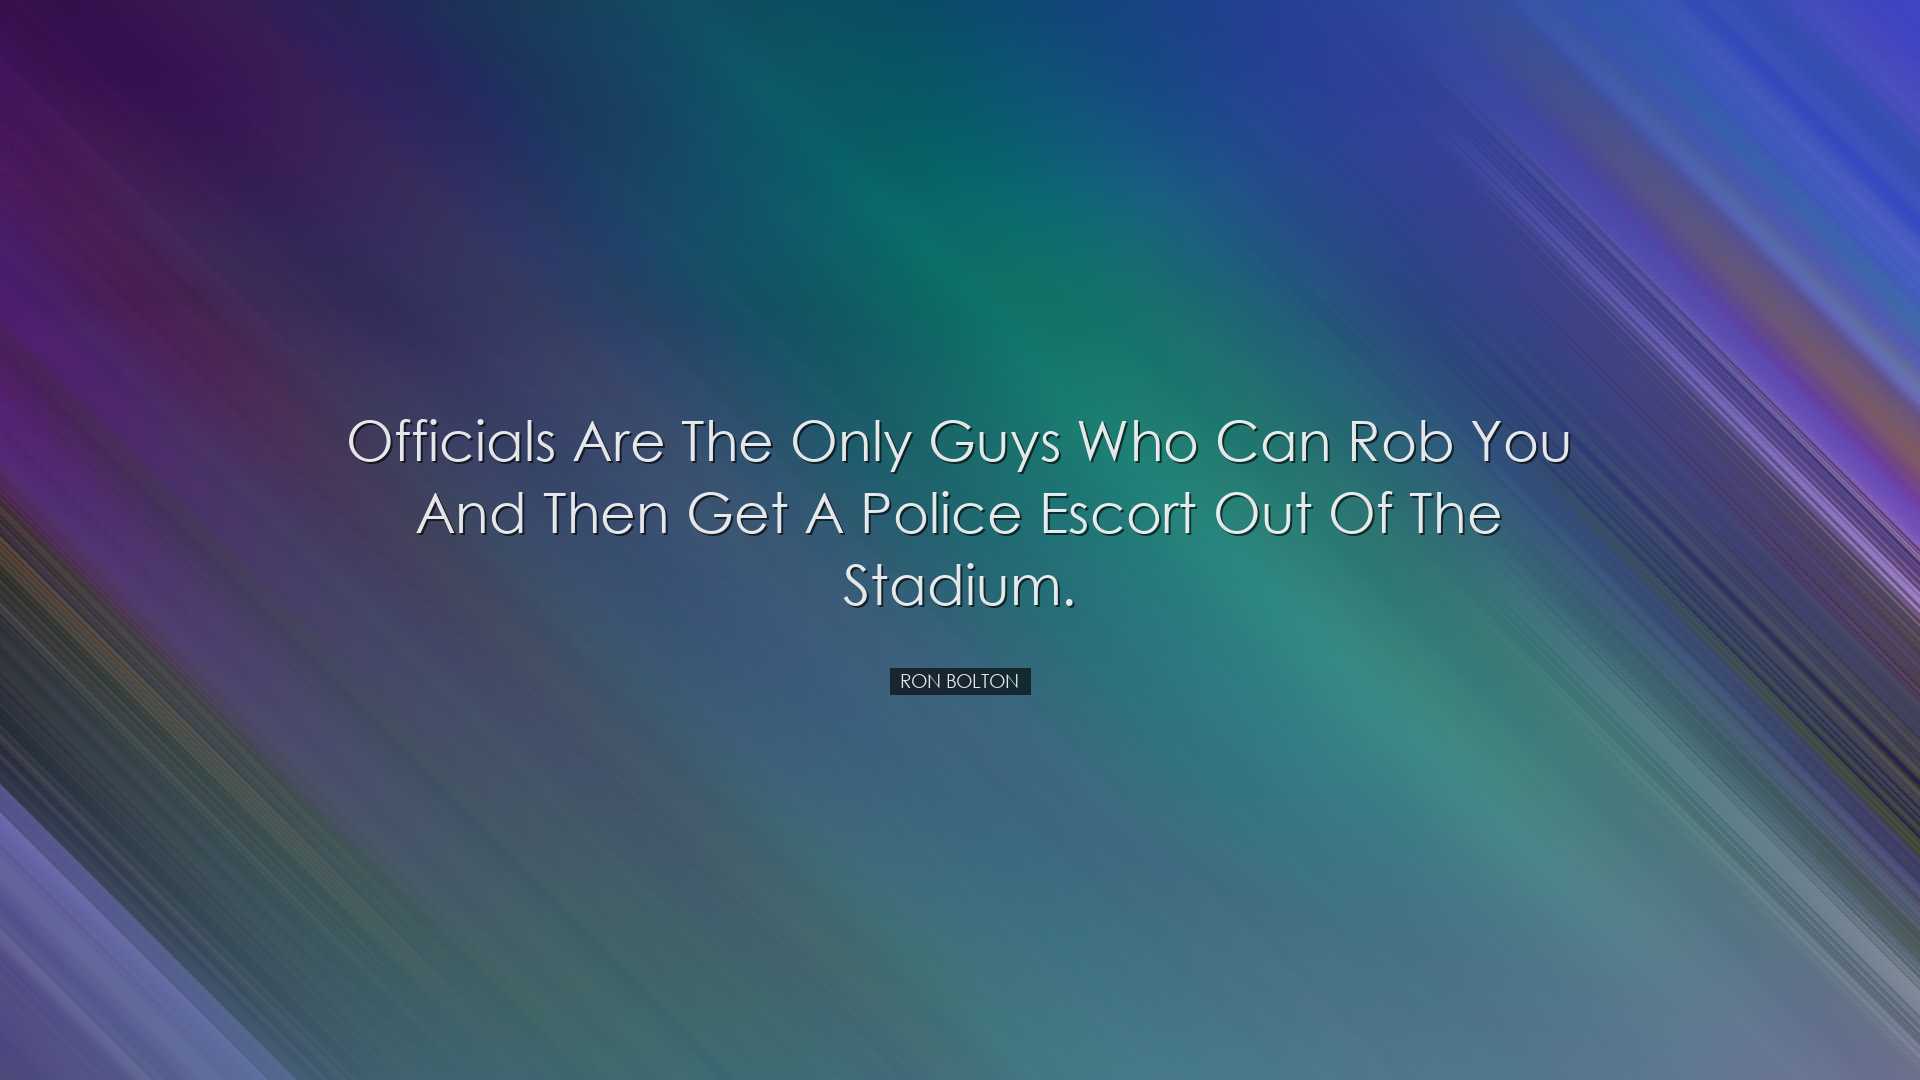 Officials are the only guys who can rob you and then get a police